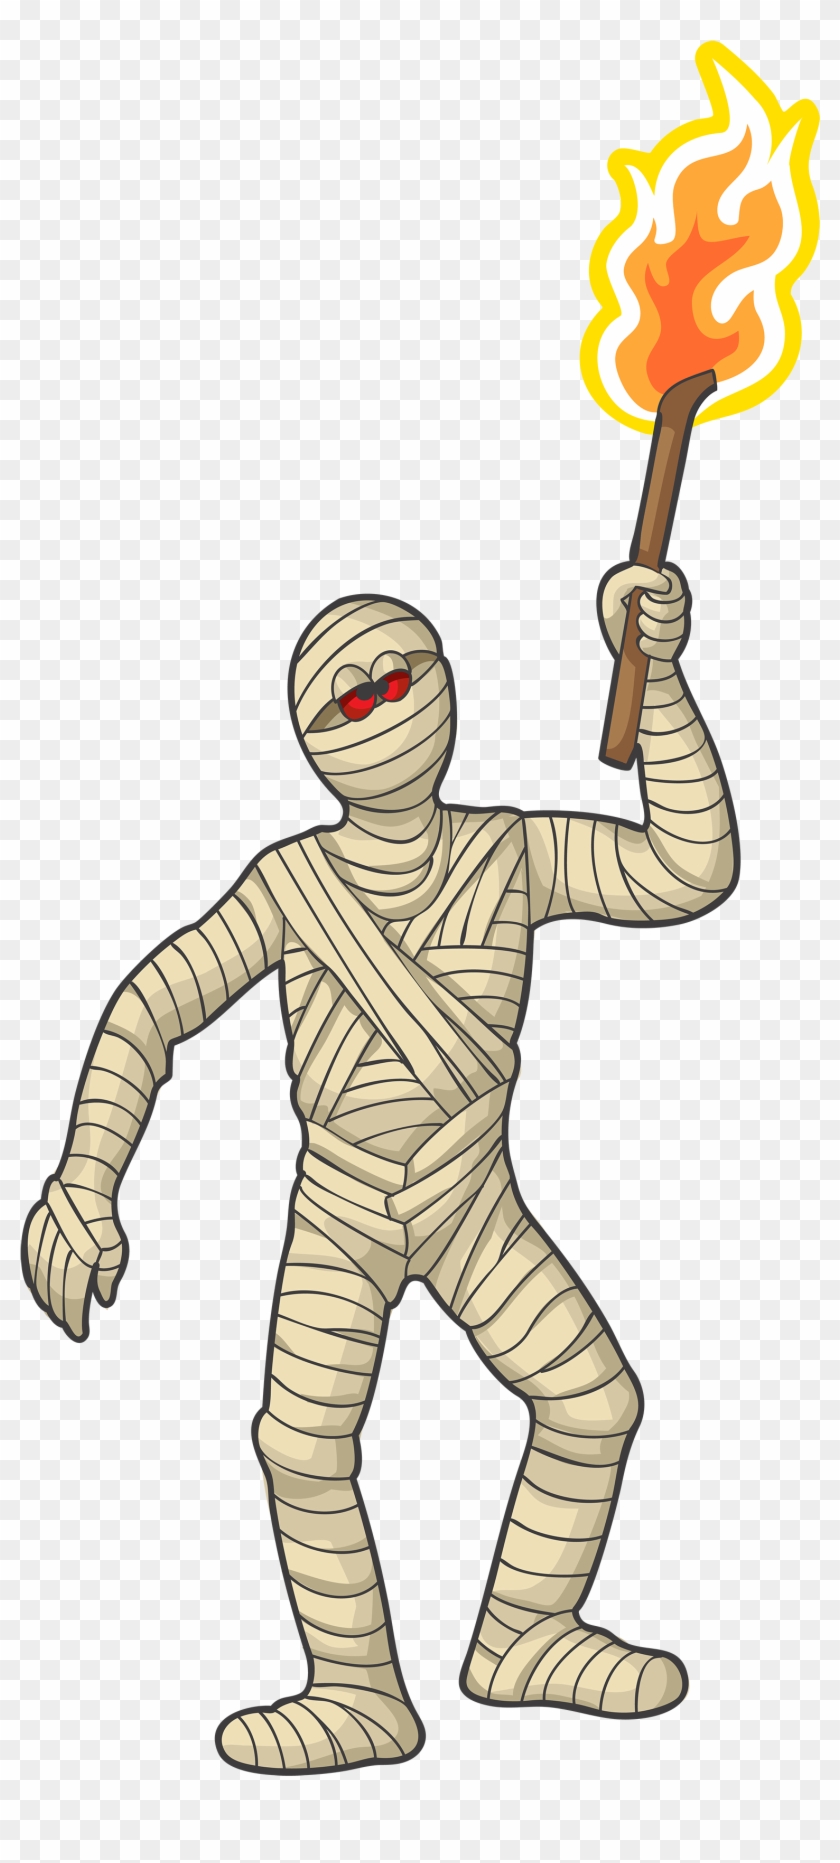 Mummy Clipart Free Images 2 Image - Mummy Clipart Png #1014083